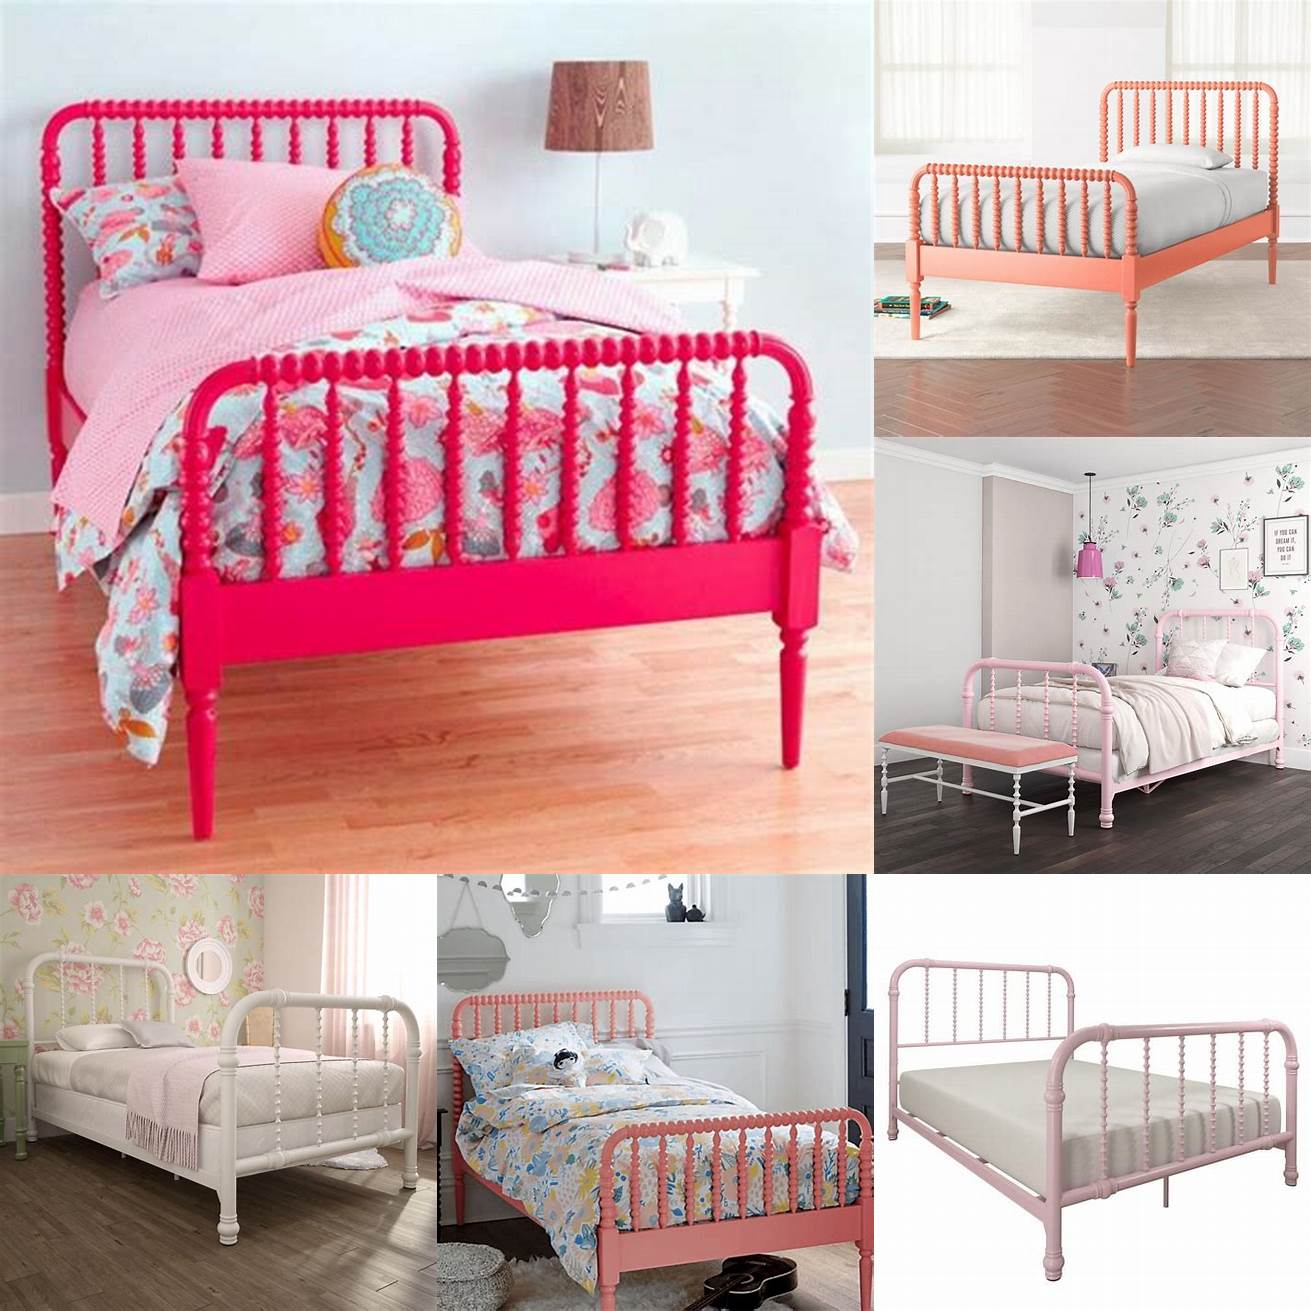 The pink Jenny Lind bed is a fun and playful option for a childs bedroom